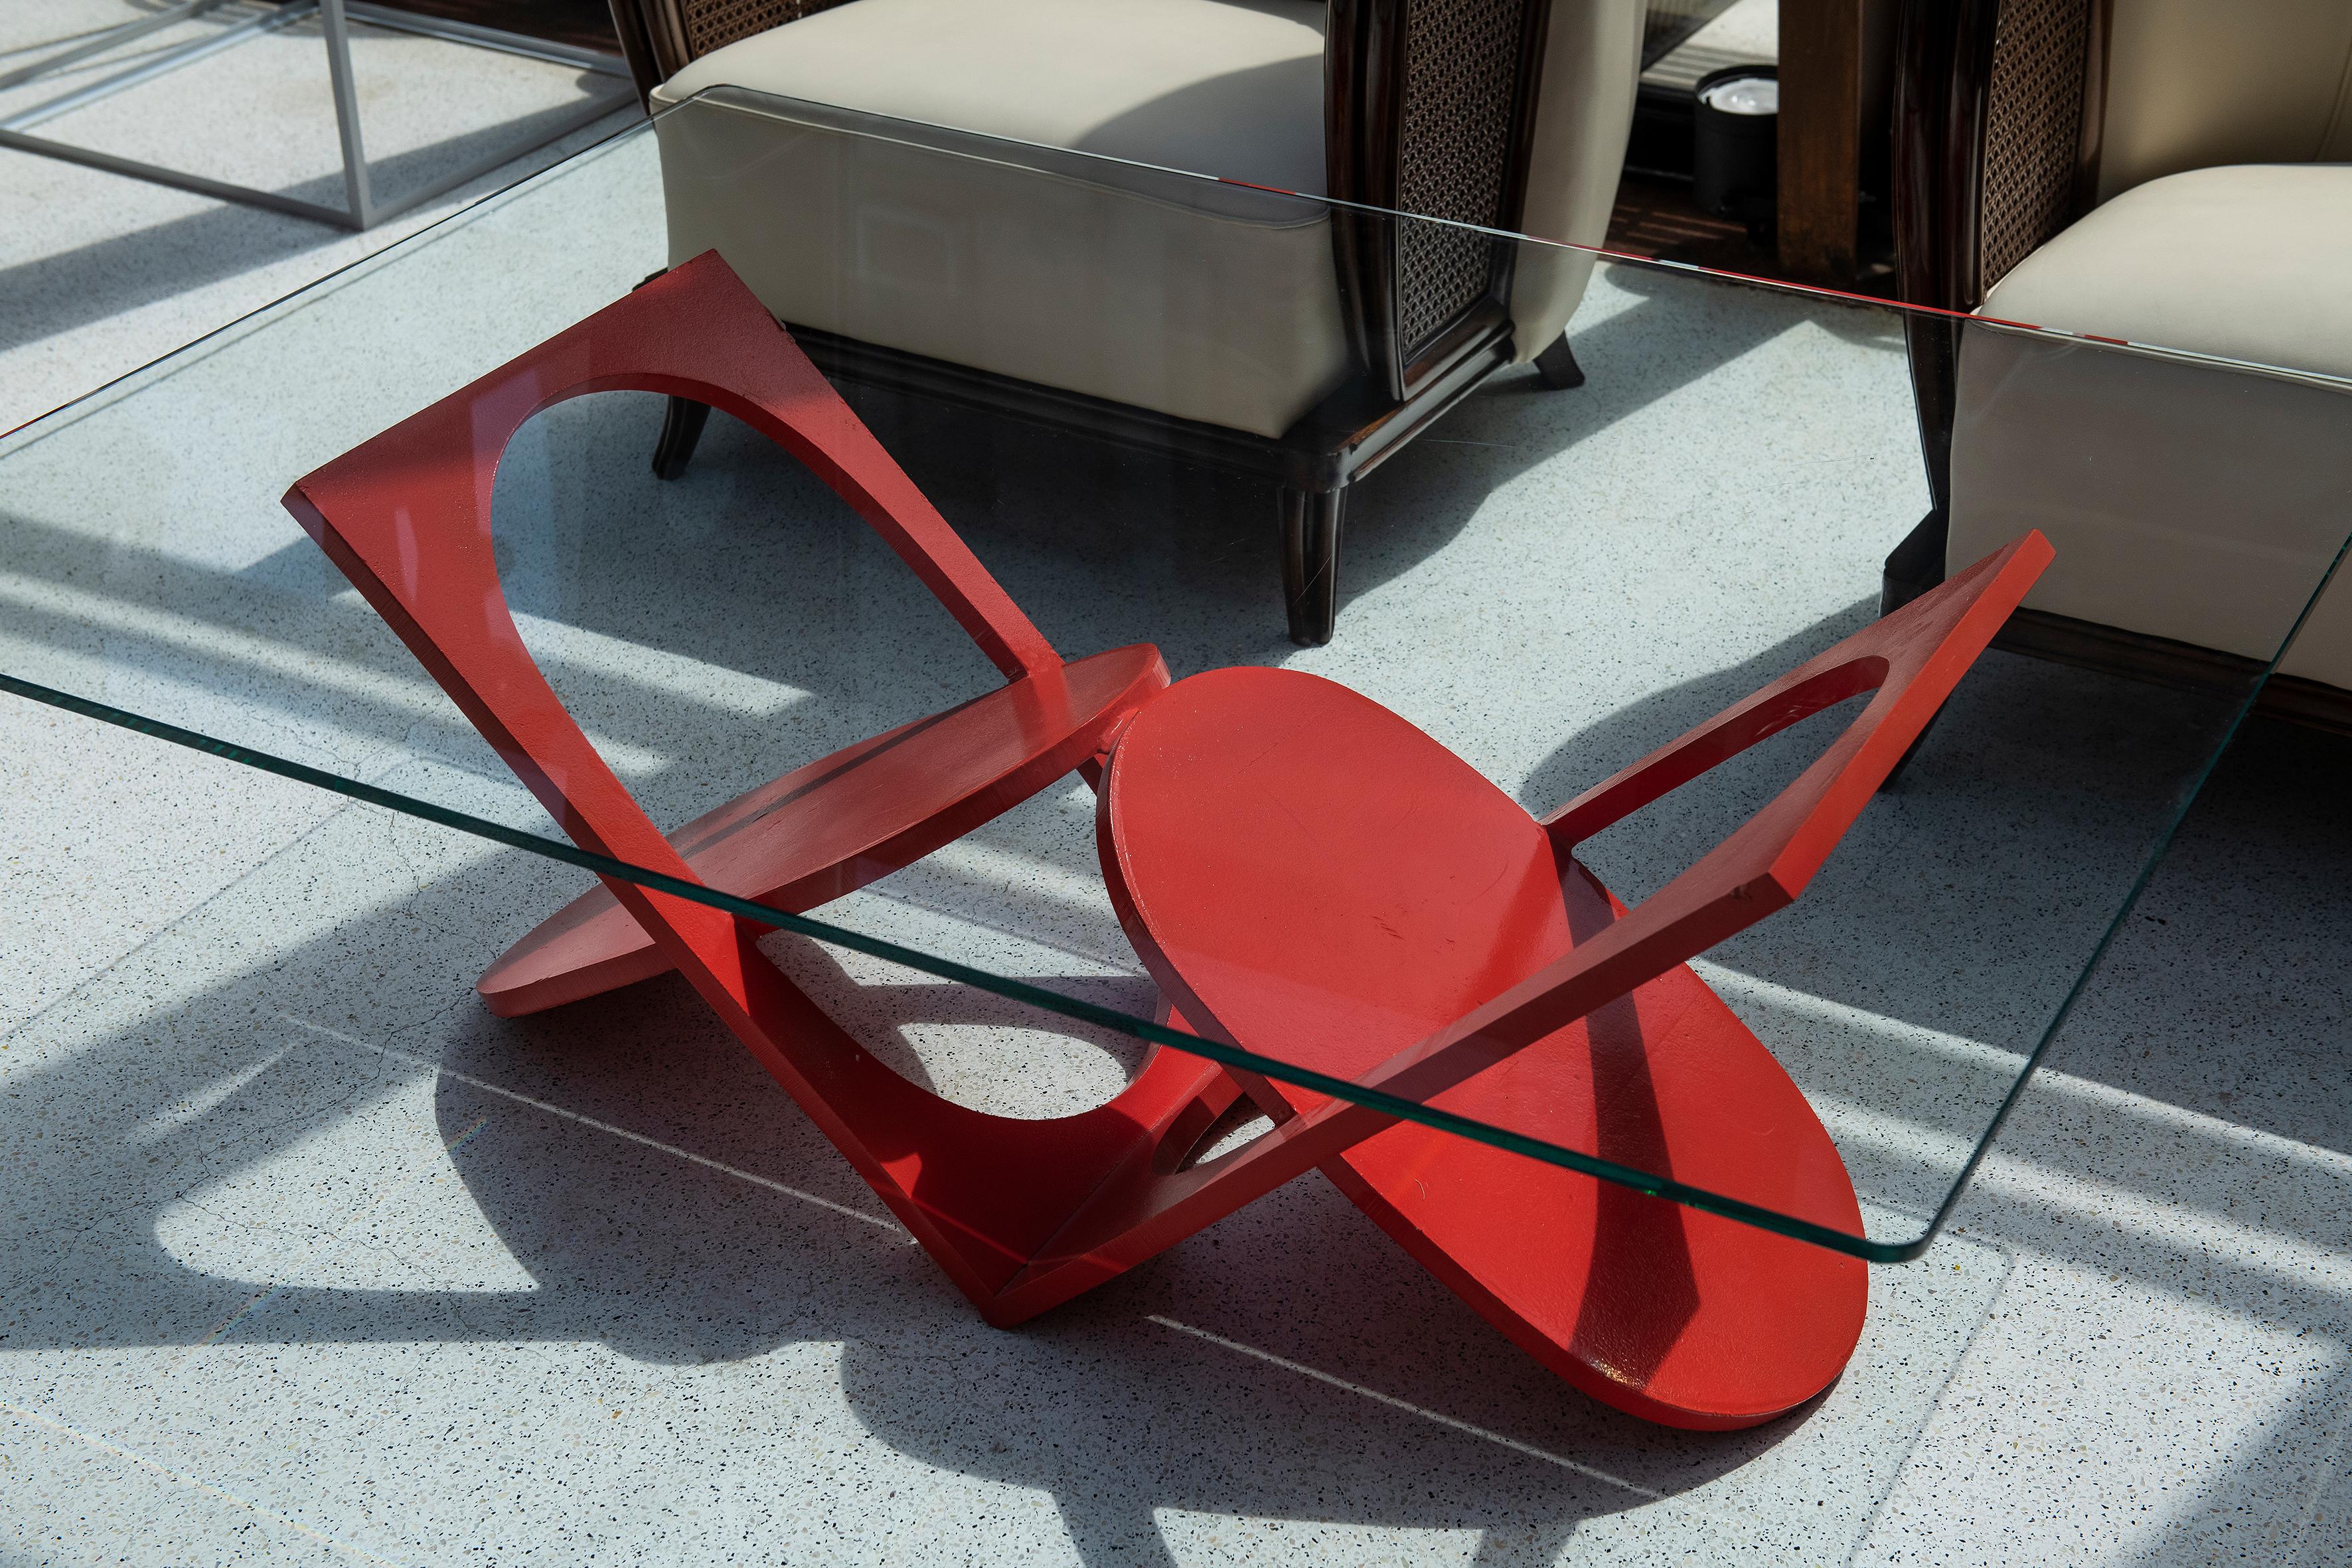 Painted cast iron low table by Valenti. Barcelona, circa 1970.

Dimensions of the table structure without glass: 43 cm height, 90 cm width, 40 cm depth.